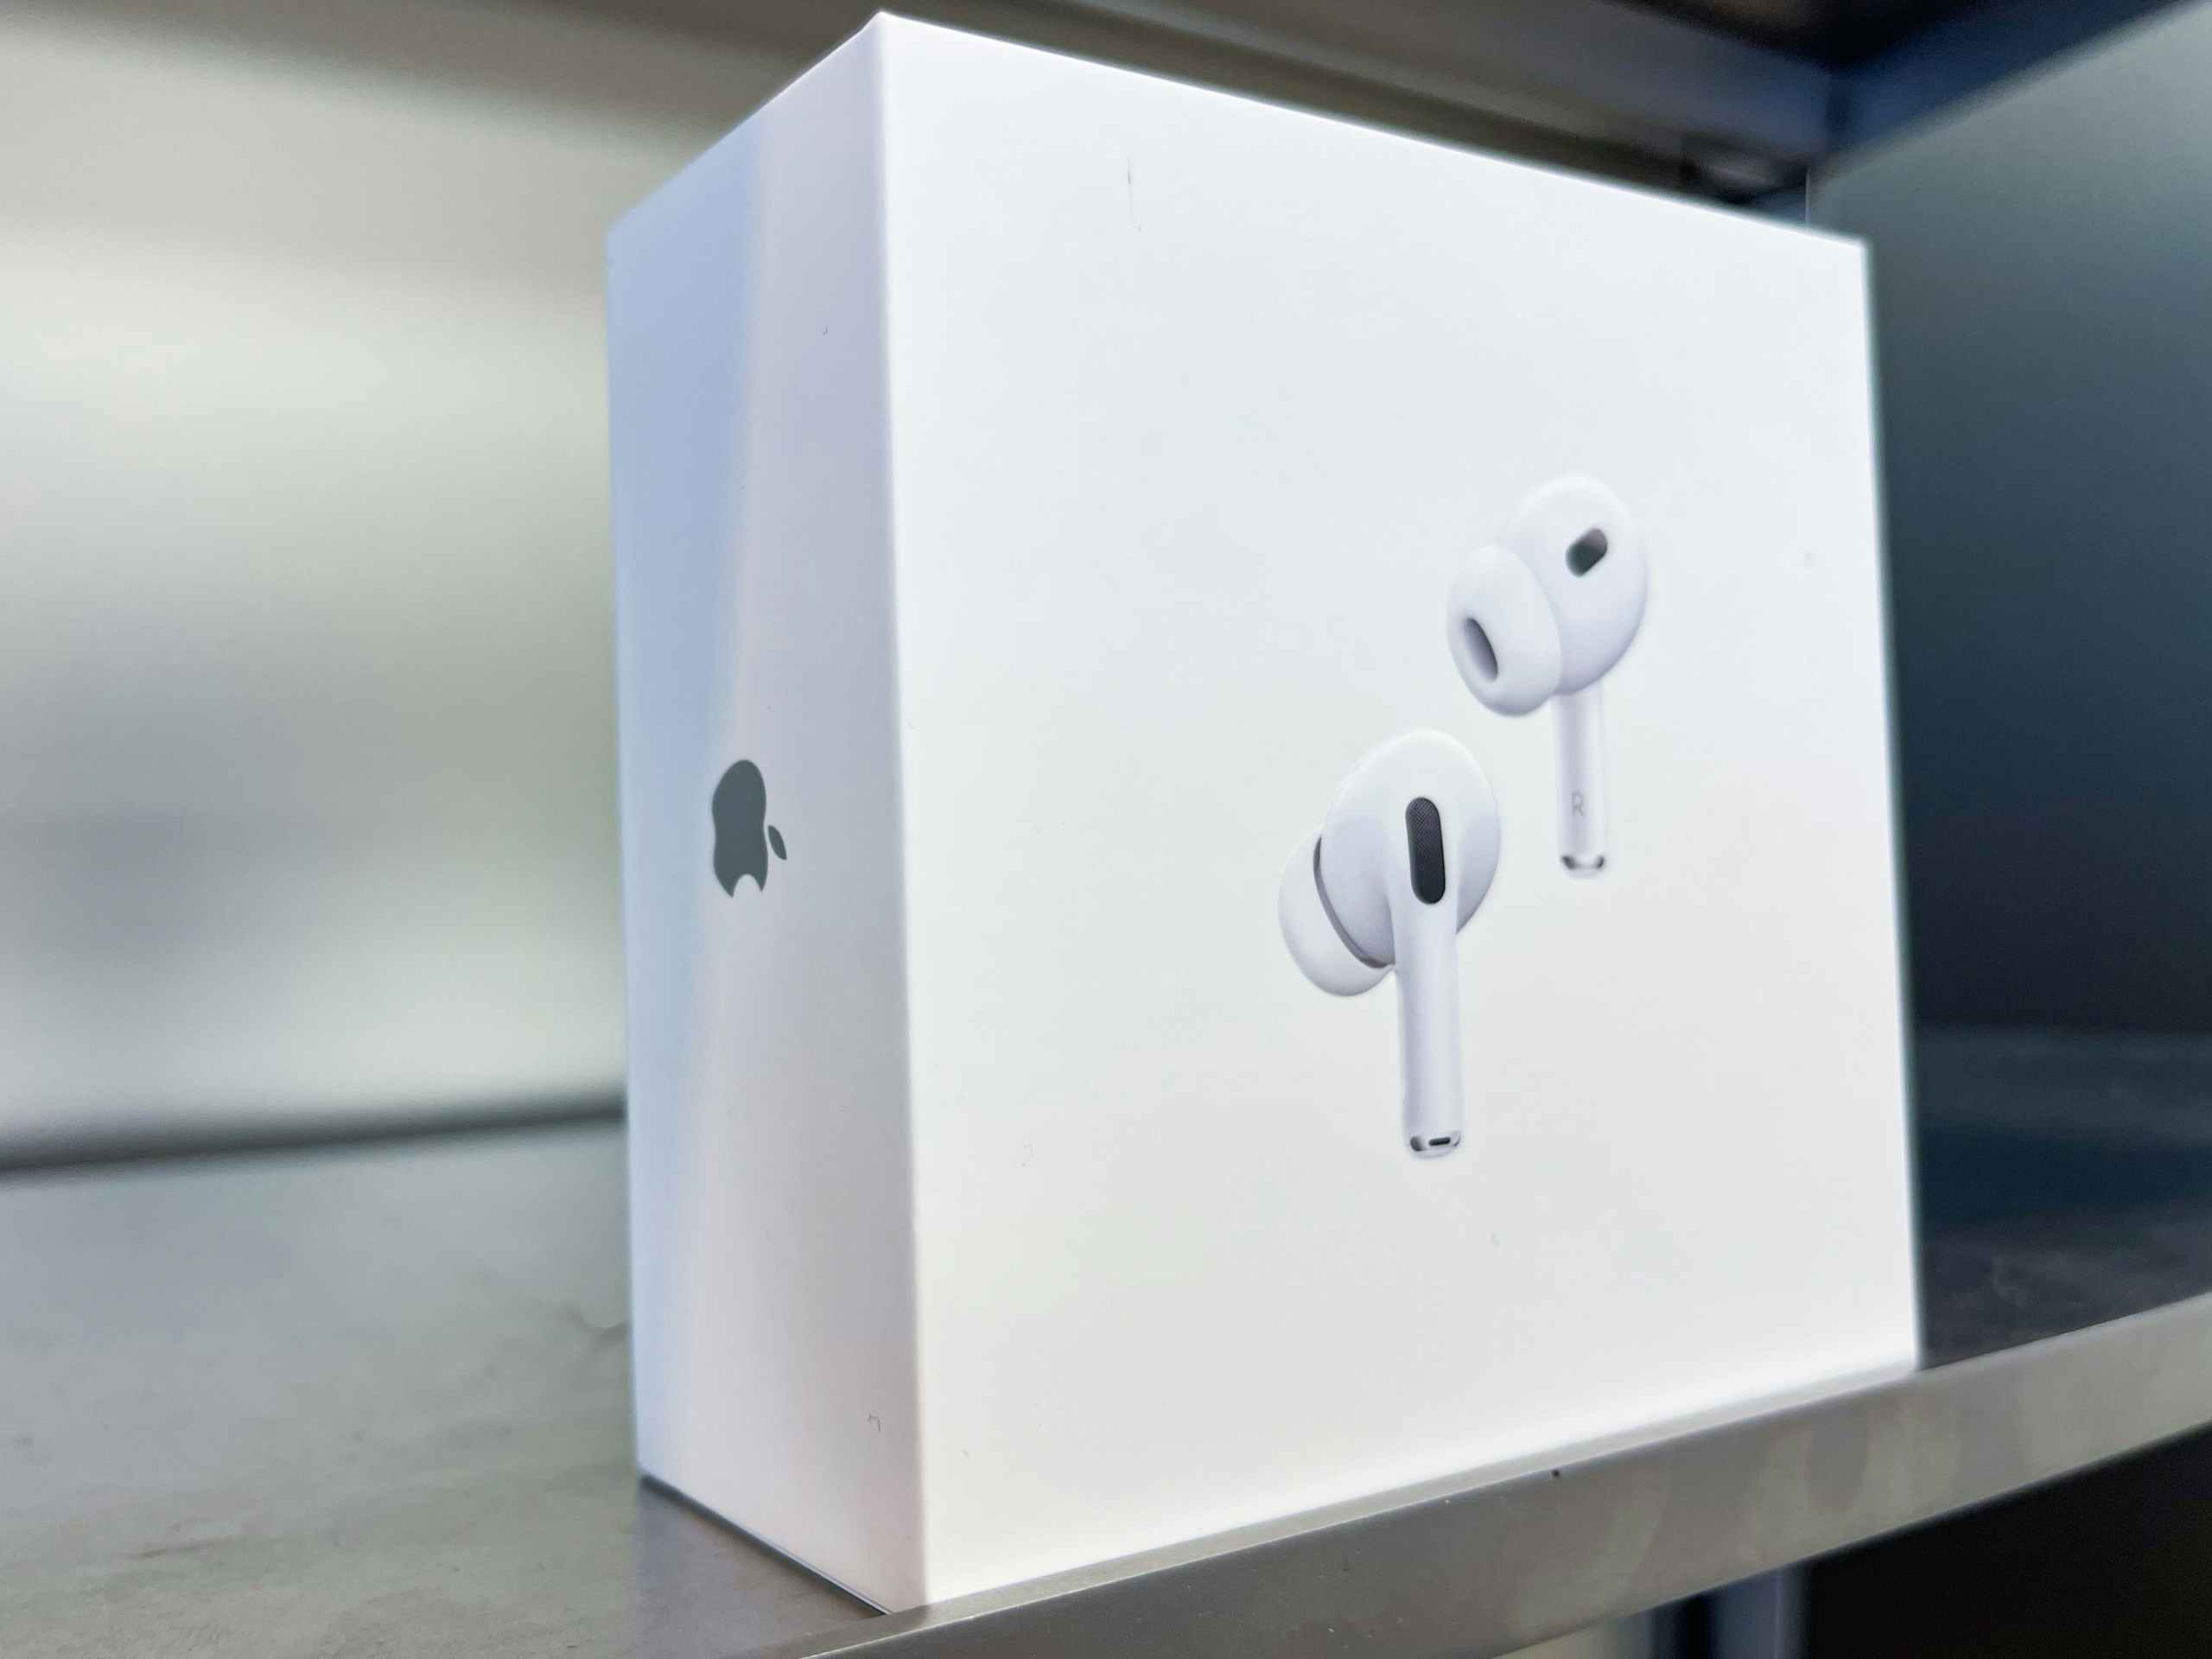 $89 Apple AirPods and $179.99 Apple AirPods Pro on Amazon